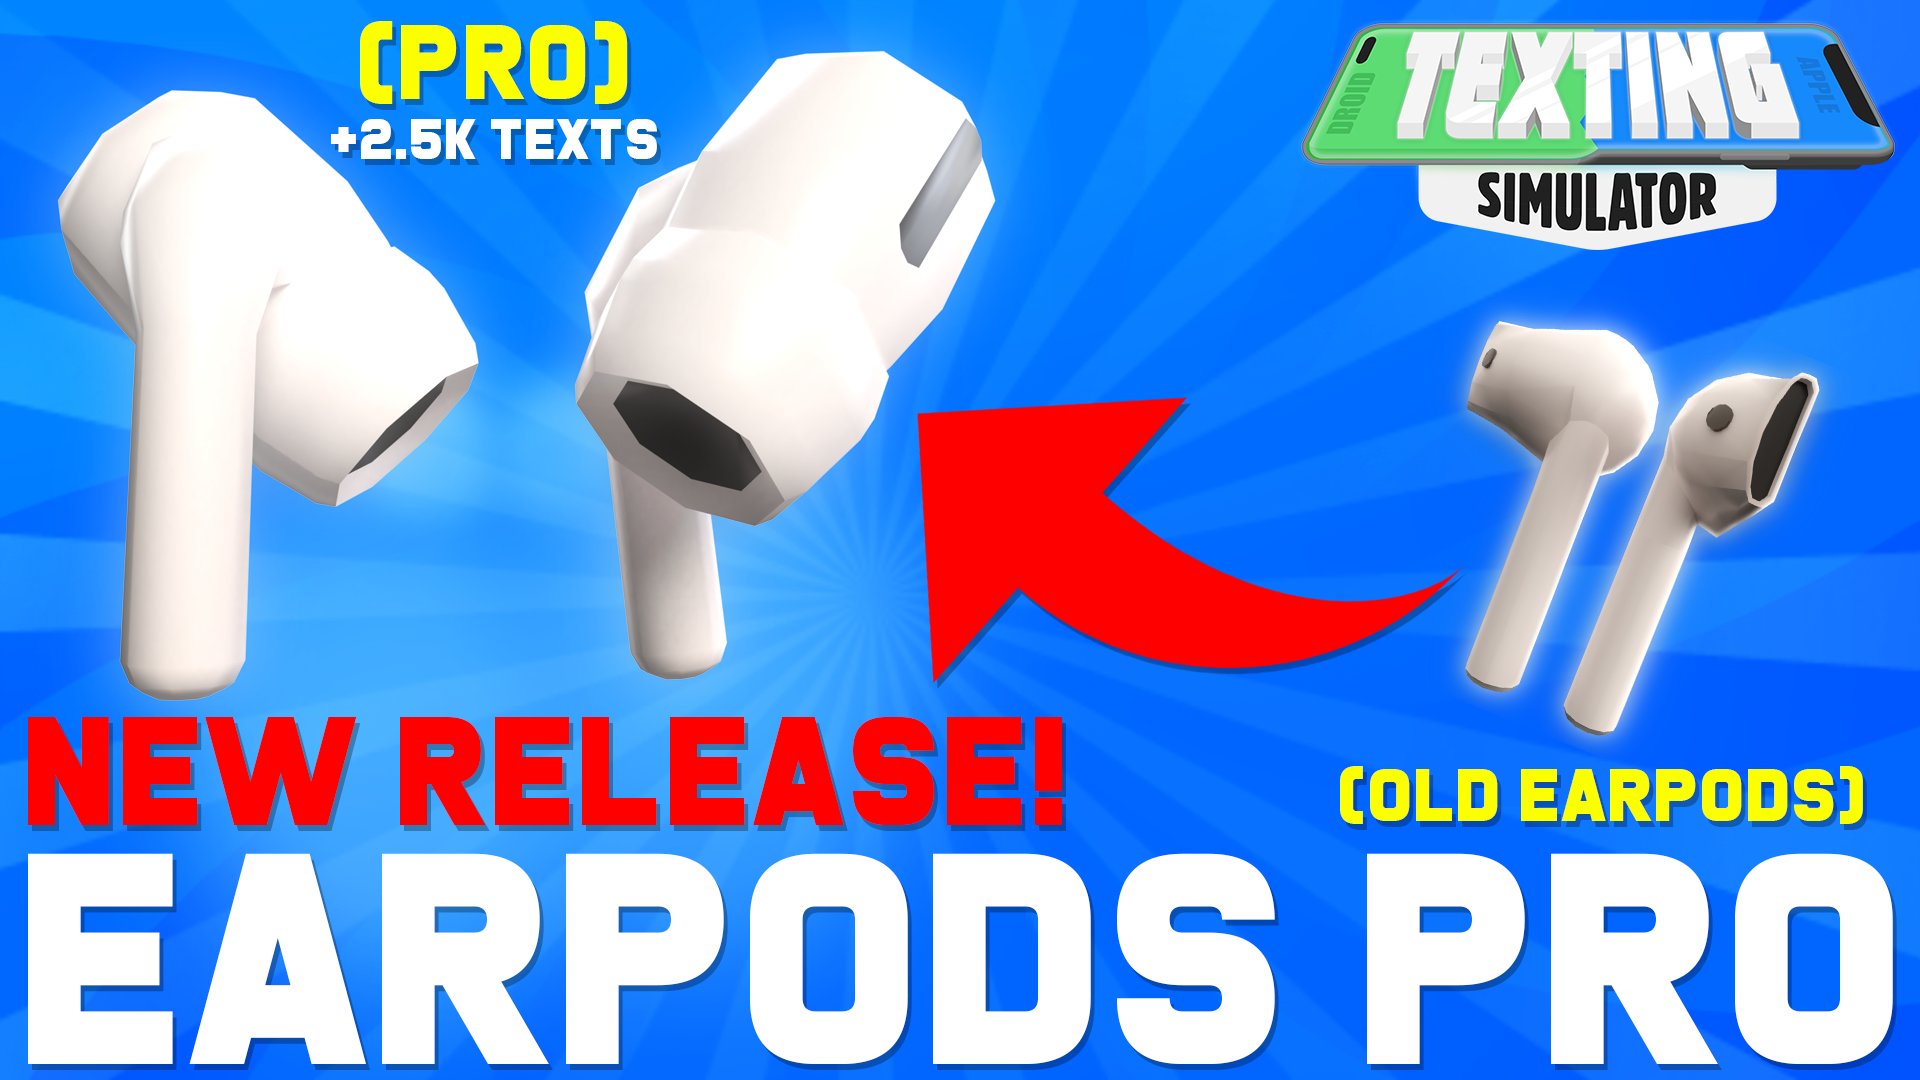 holdall kompas tunnel Ricky on Twitter: "🔥Earpods Pro have been officially released in Texting  Simulator!🔥 Upgrade your old wireless earpods in-game and add an amazing  2.5k texts to any device you use! Plus use code "